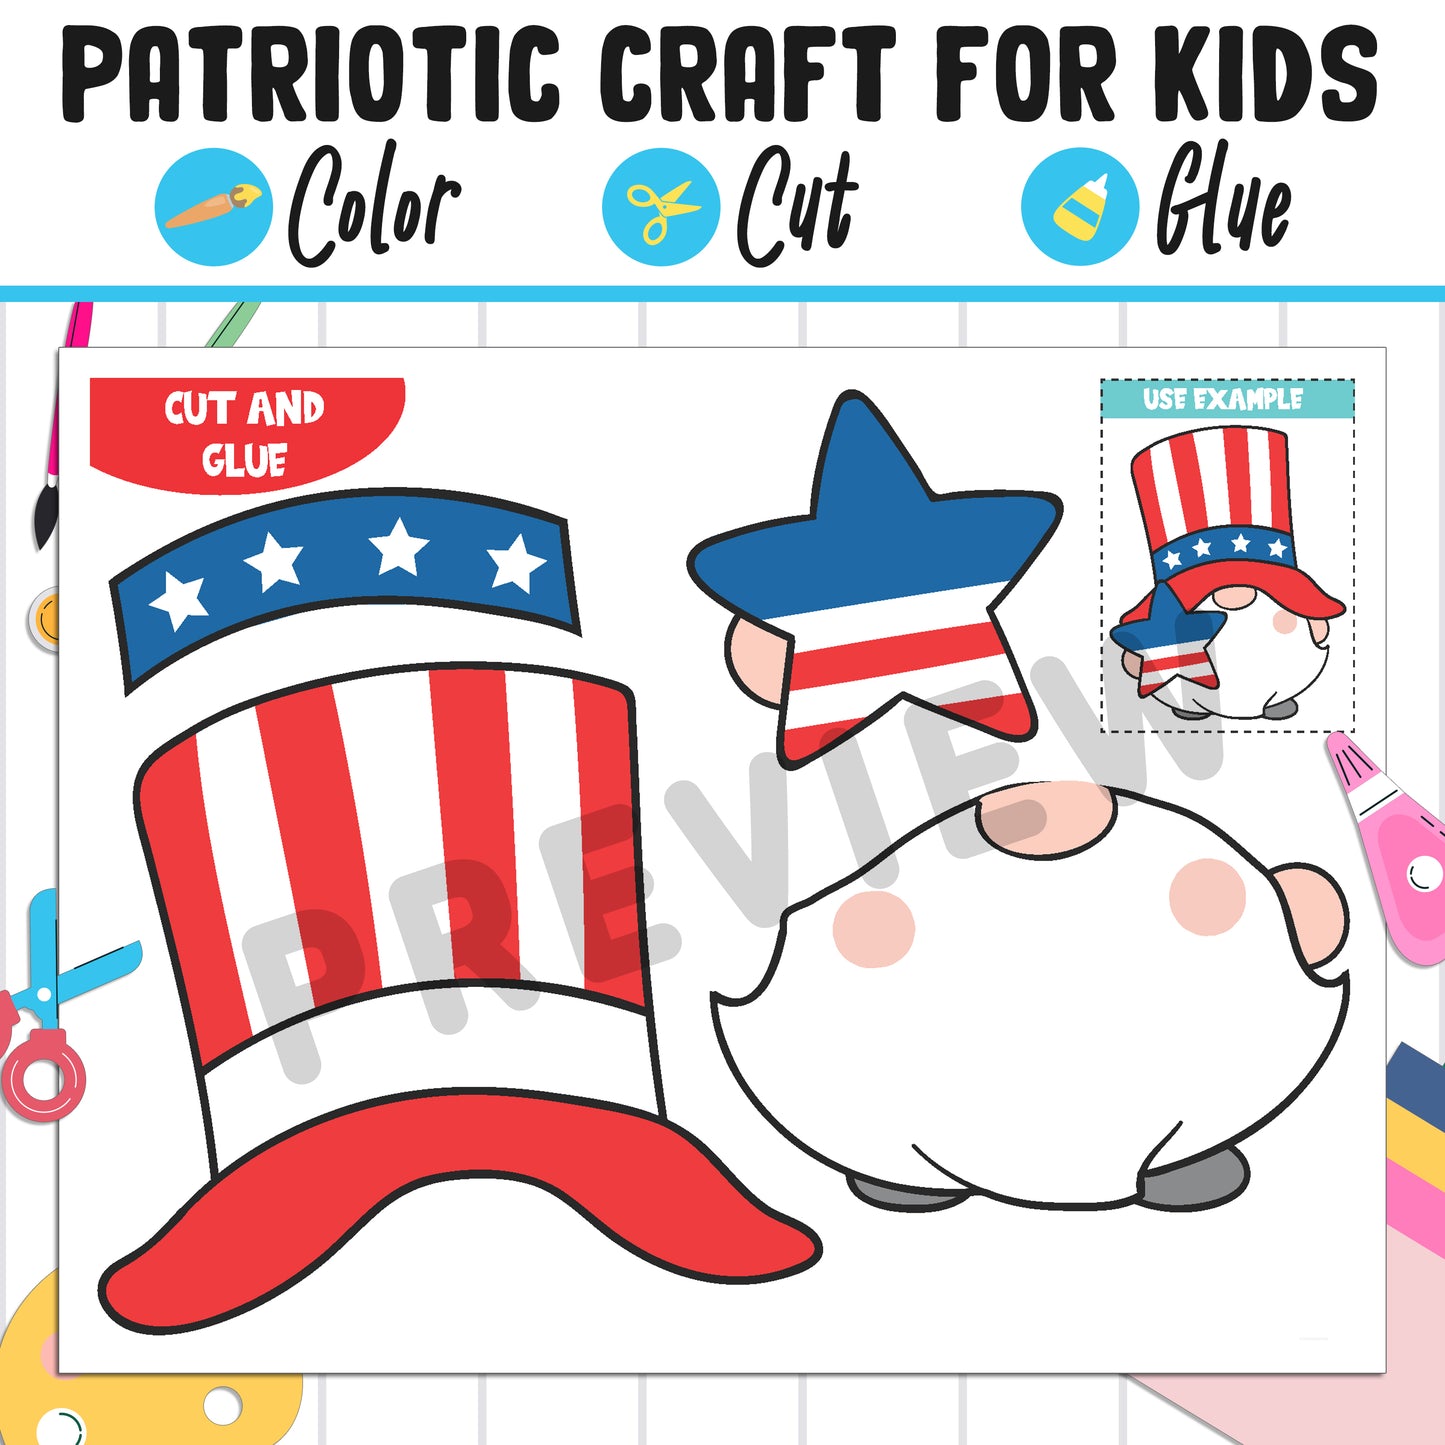 Patriotic Craft for Kids : Color, Cut, and Glue, a Fun 4th of July Activity for Pre K to 2nd Grade, PDF Instant Download